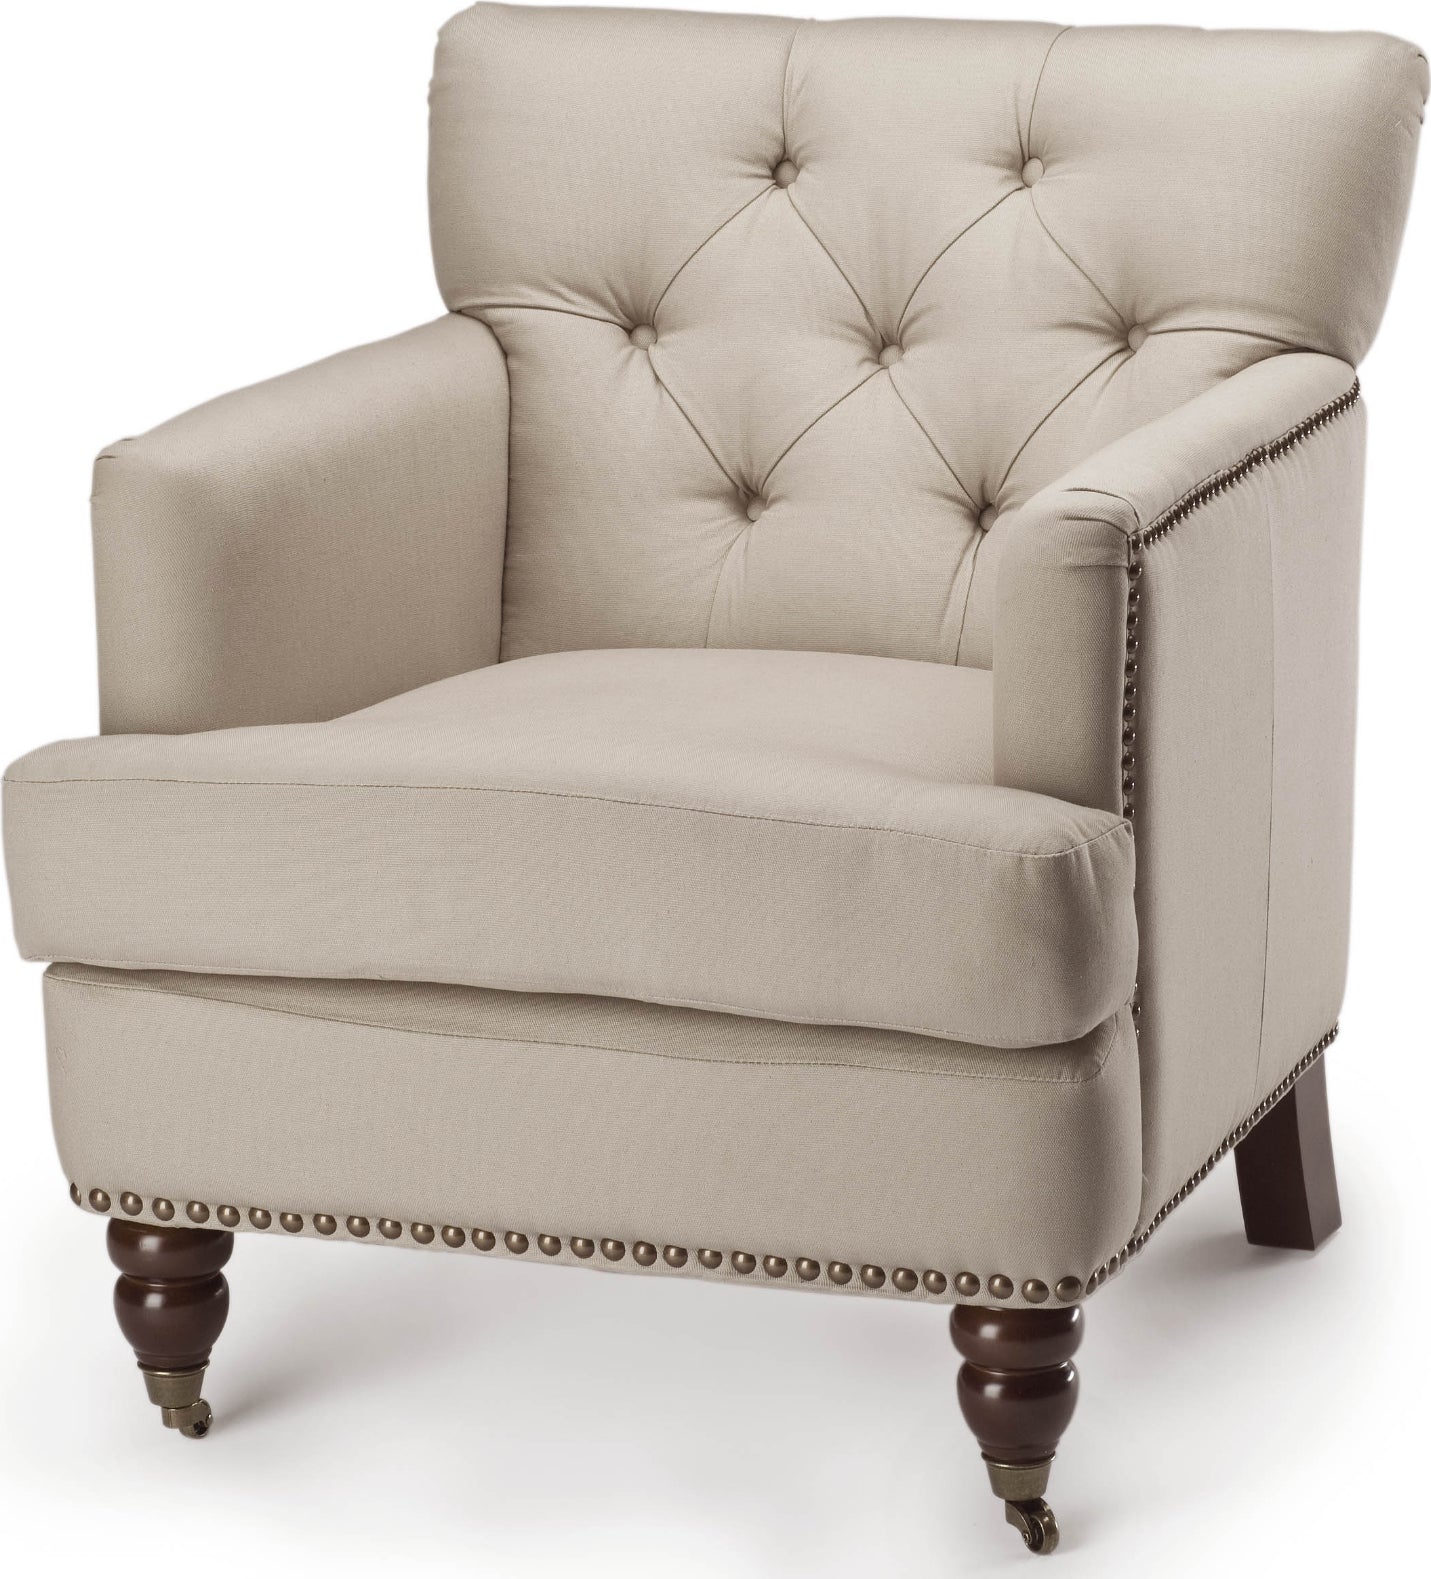 Safavieh Colin Tufted Club Chair With Brass Nail Heads Ecru and Cherry Mahogany Furniture main image